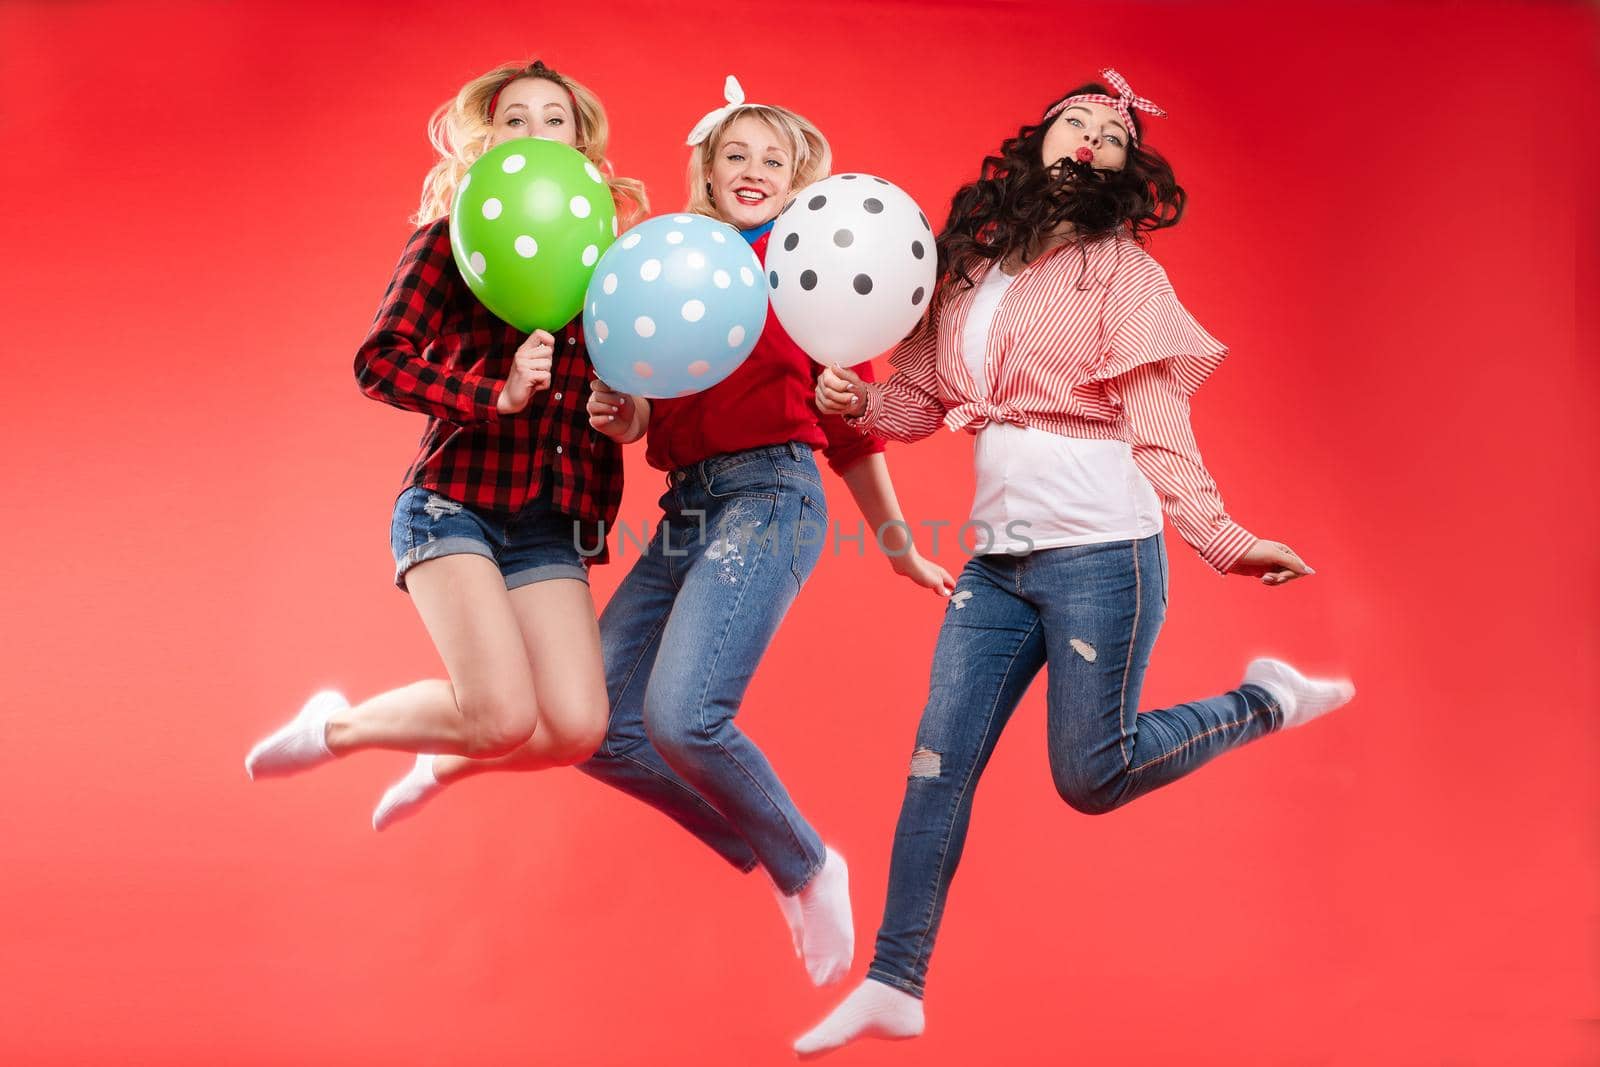 Laughing woman friend having fun jumping and smiling with colorful air balloon isolated at red studio background. Happy female teenager celebrating enjoying party posing together full shot